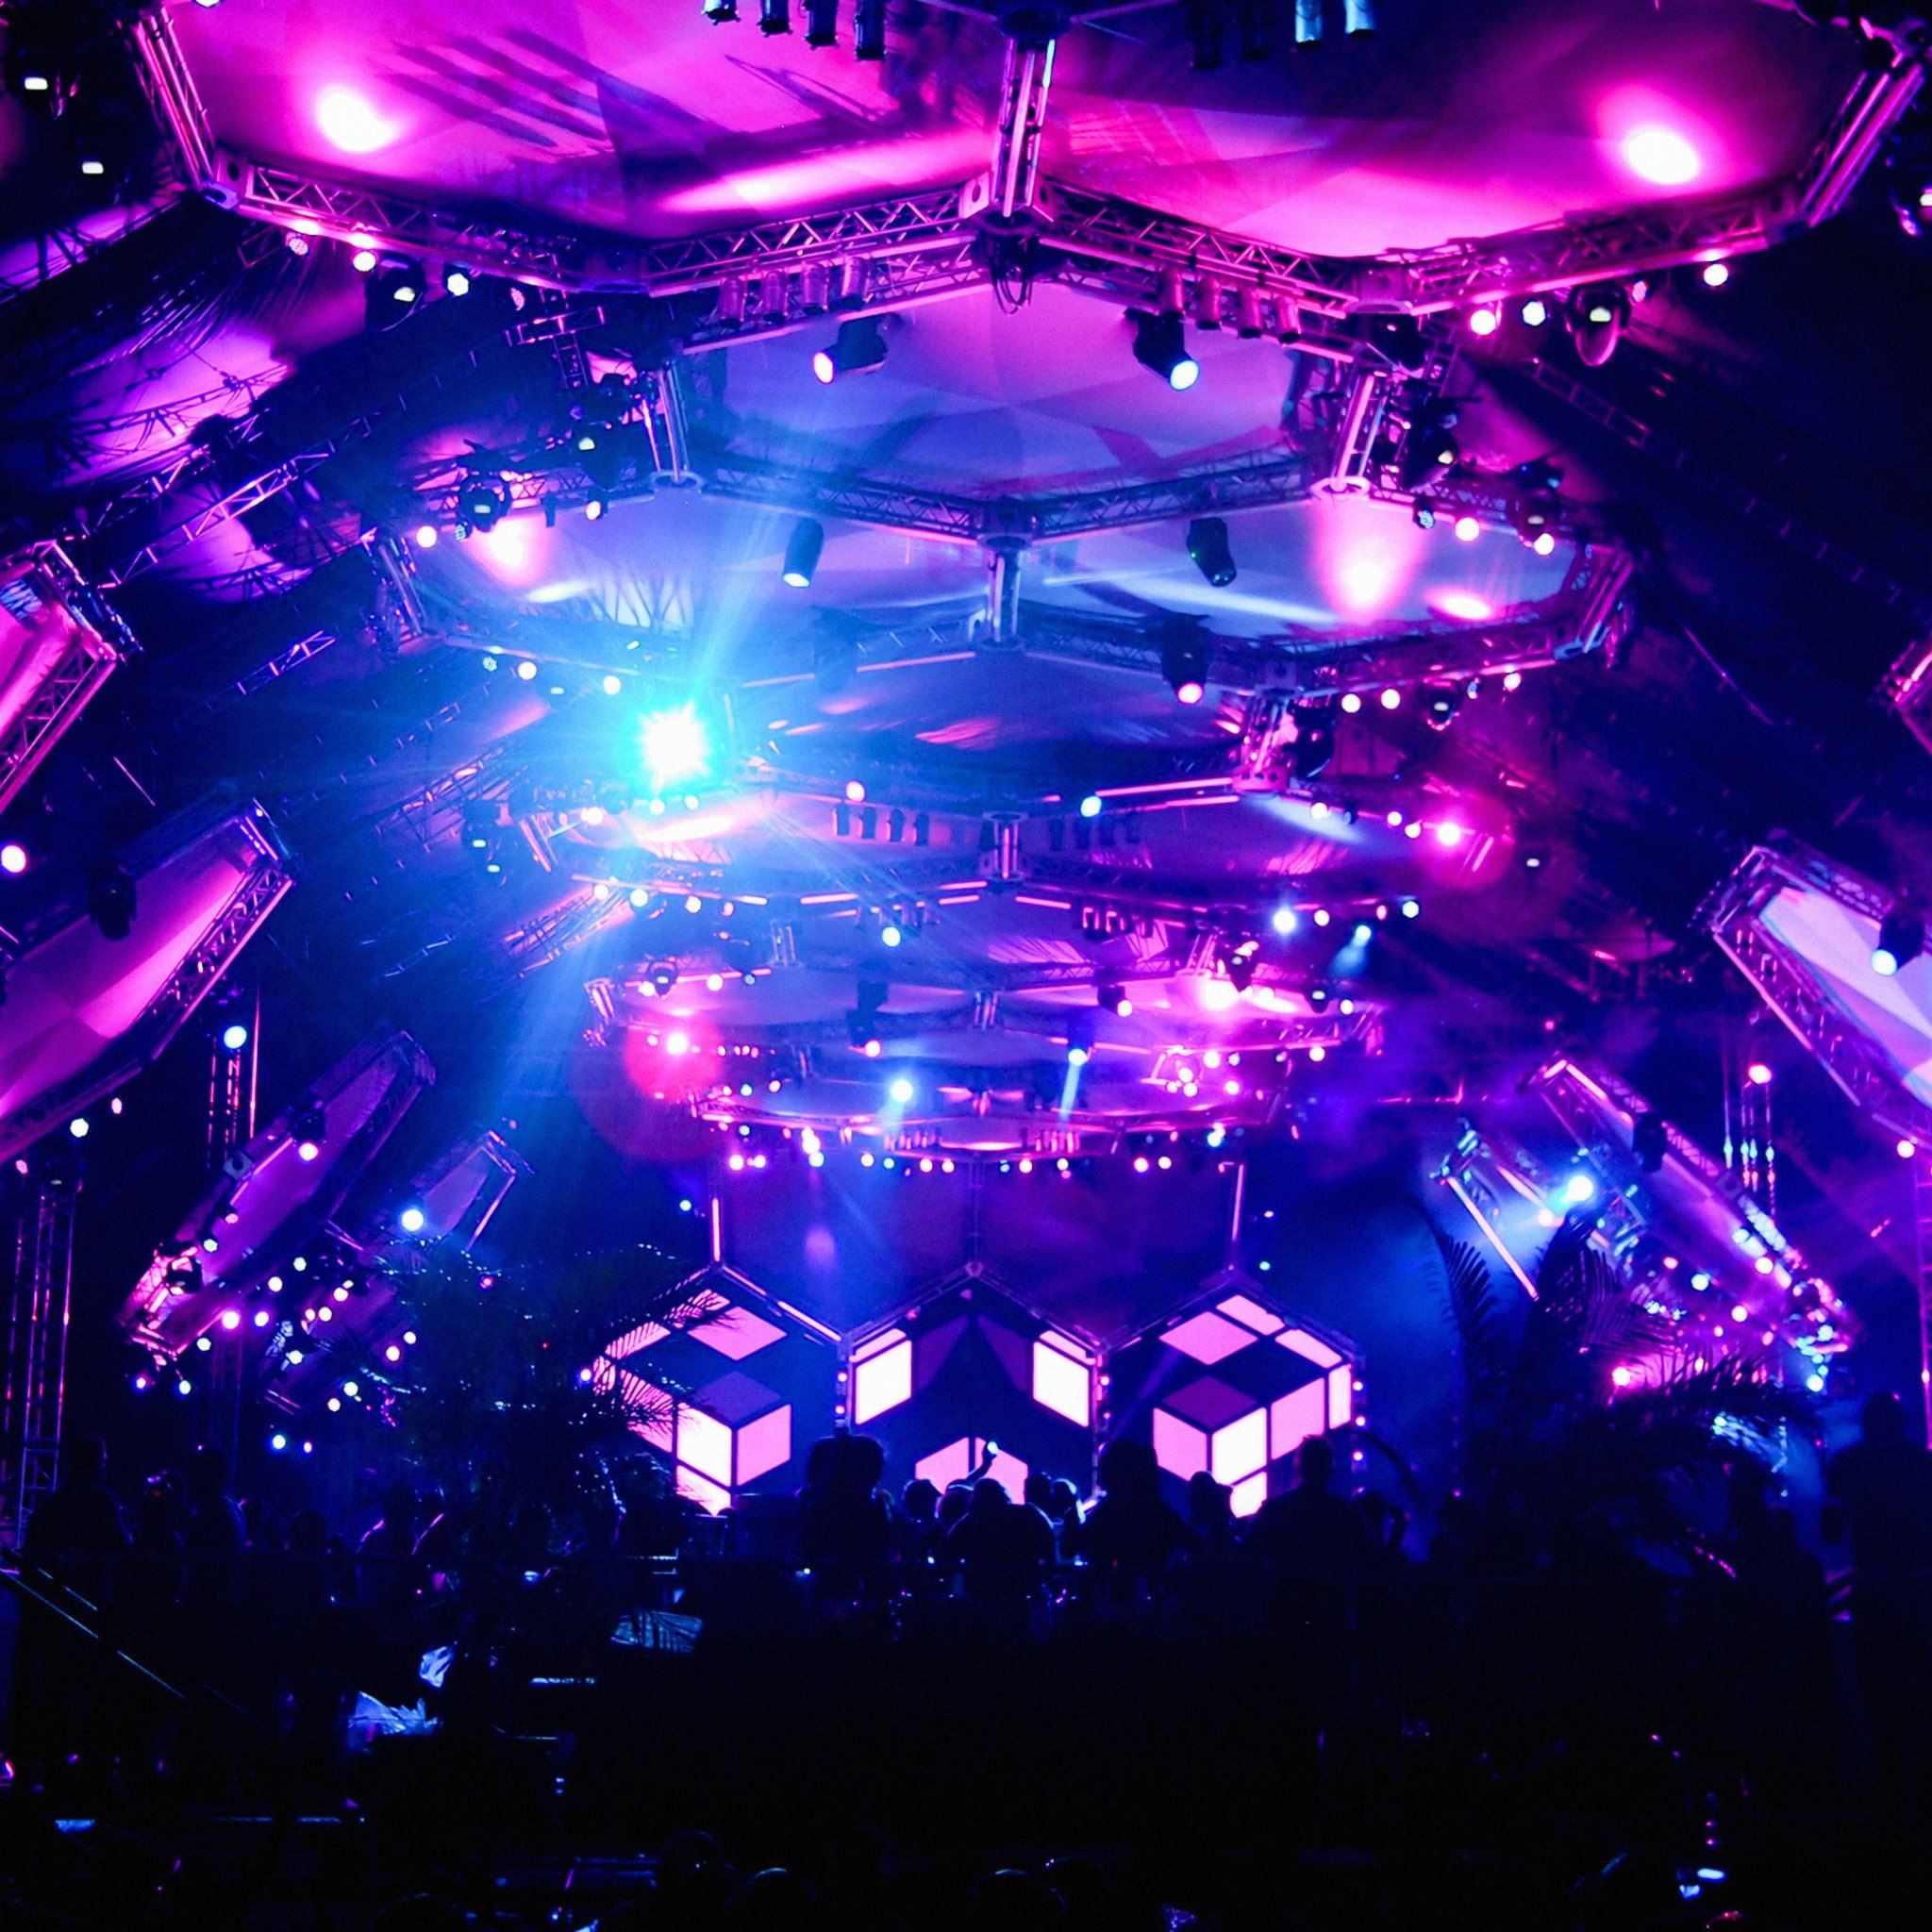 Ultra Music Fest Lively Crowd Concept iPad Air wallpaper 